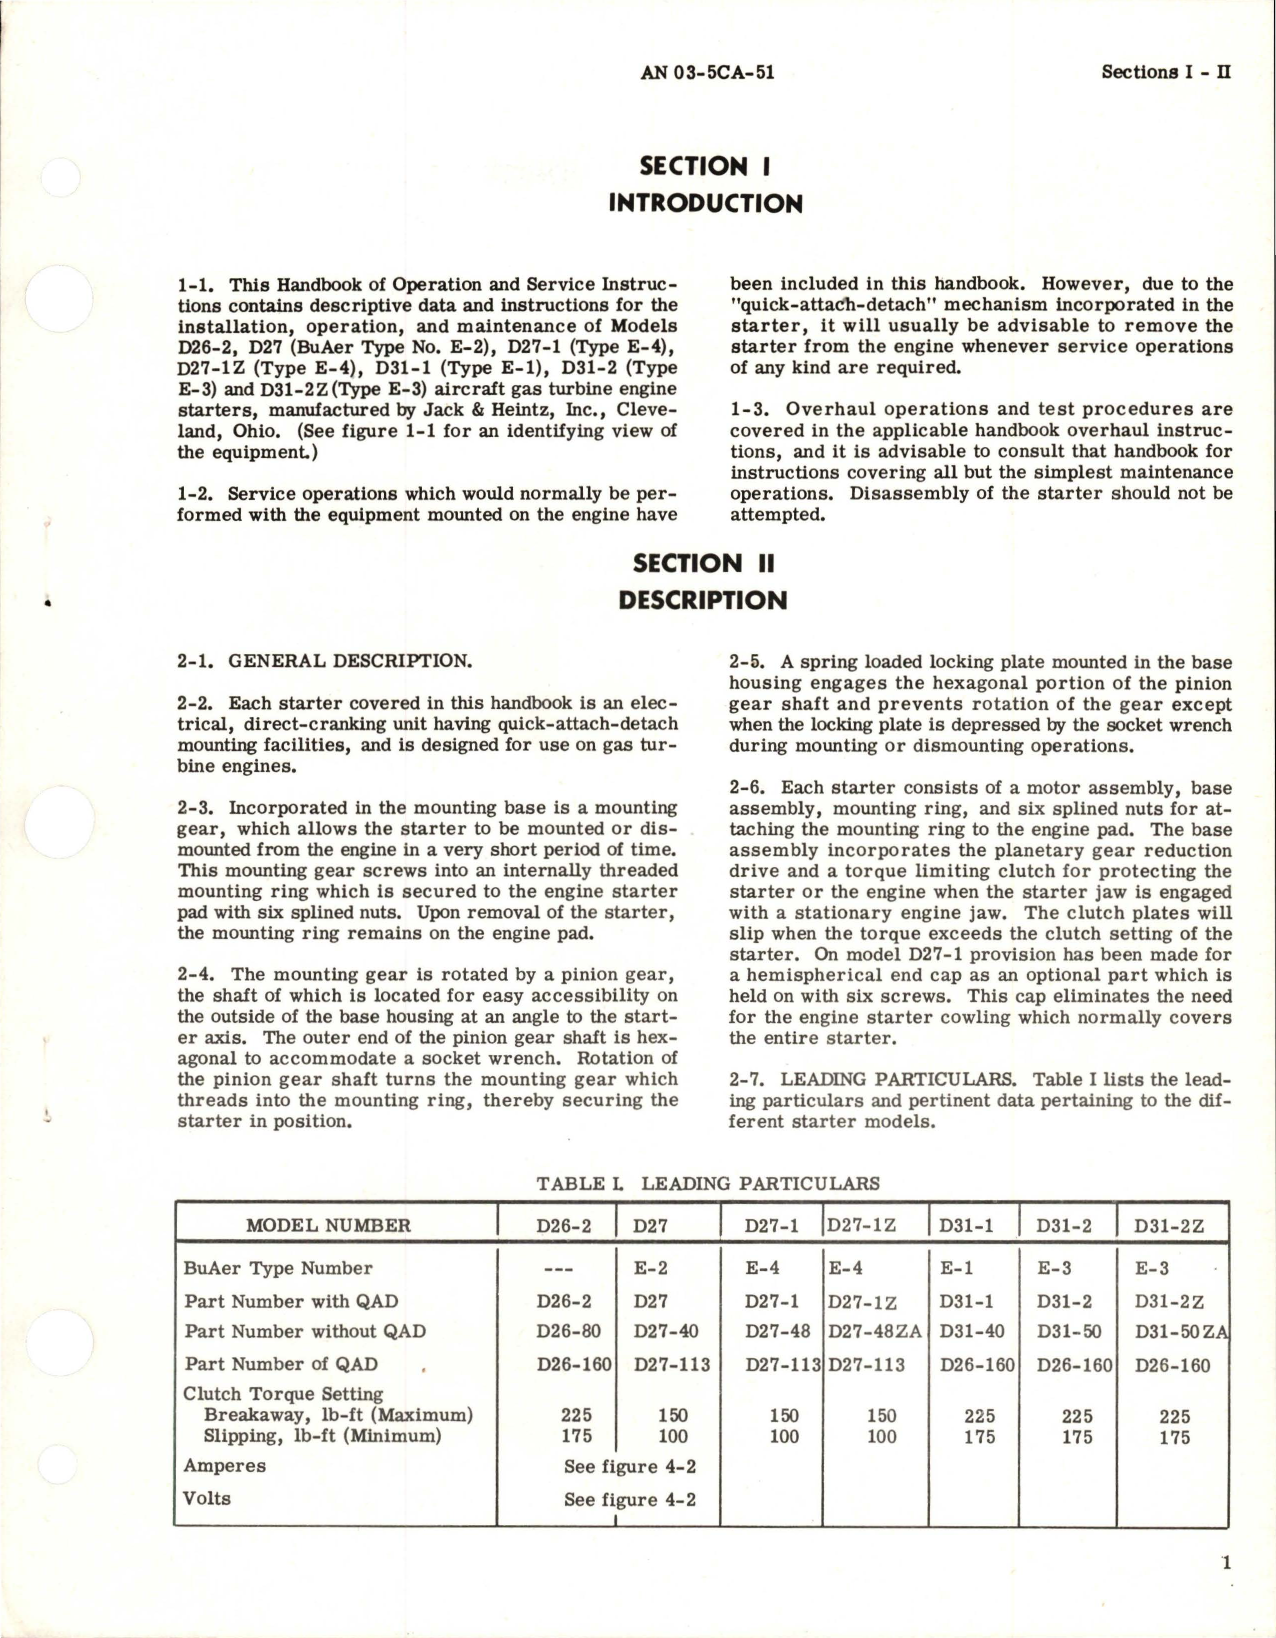 Sample page 5 from AirCorps Library document: Operation and Service Instructions for Electric Starters